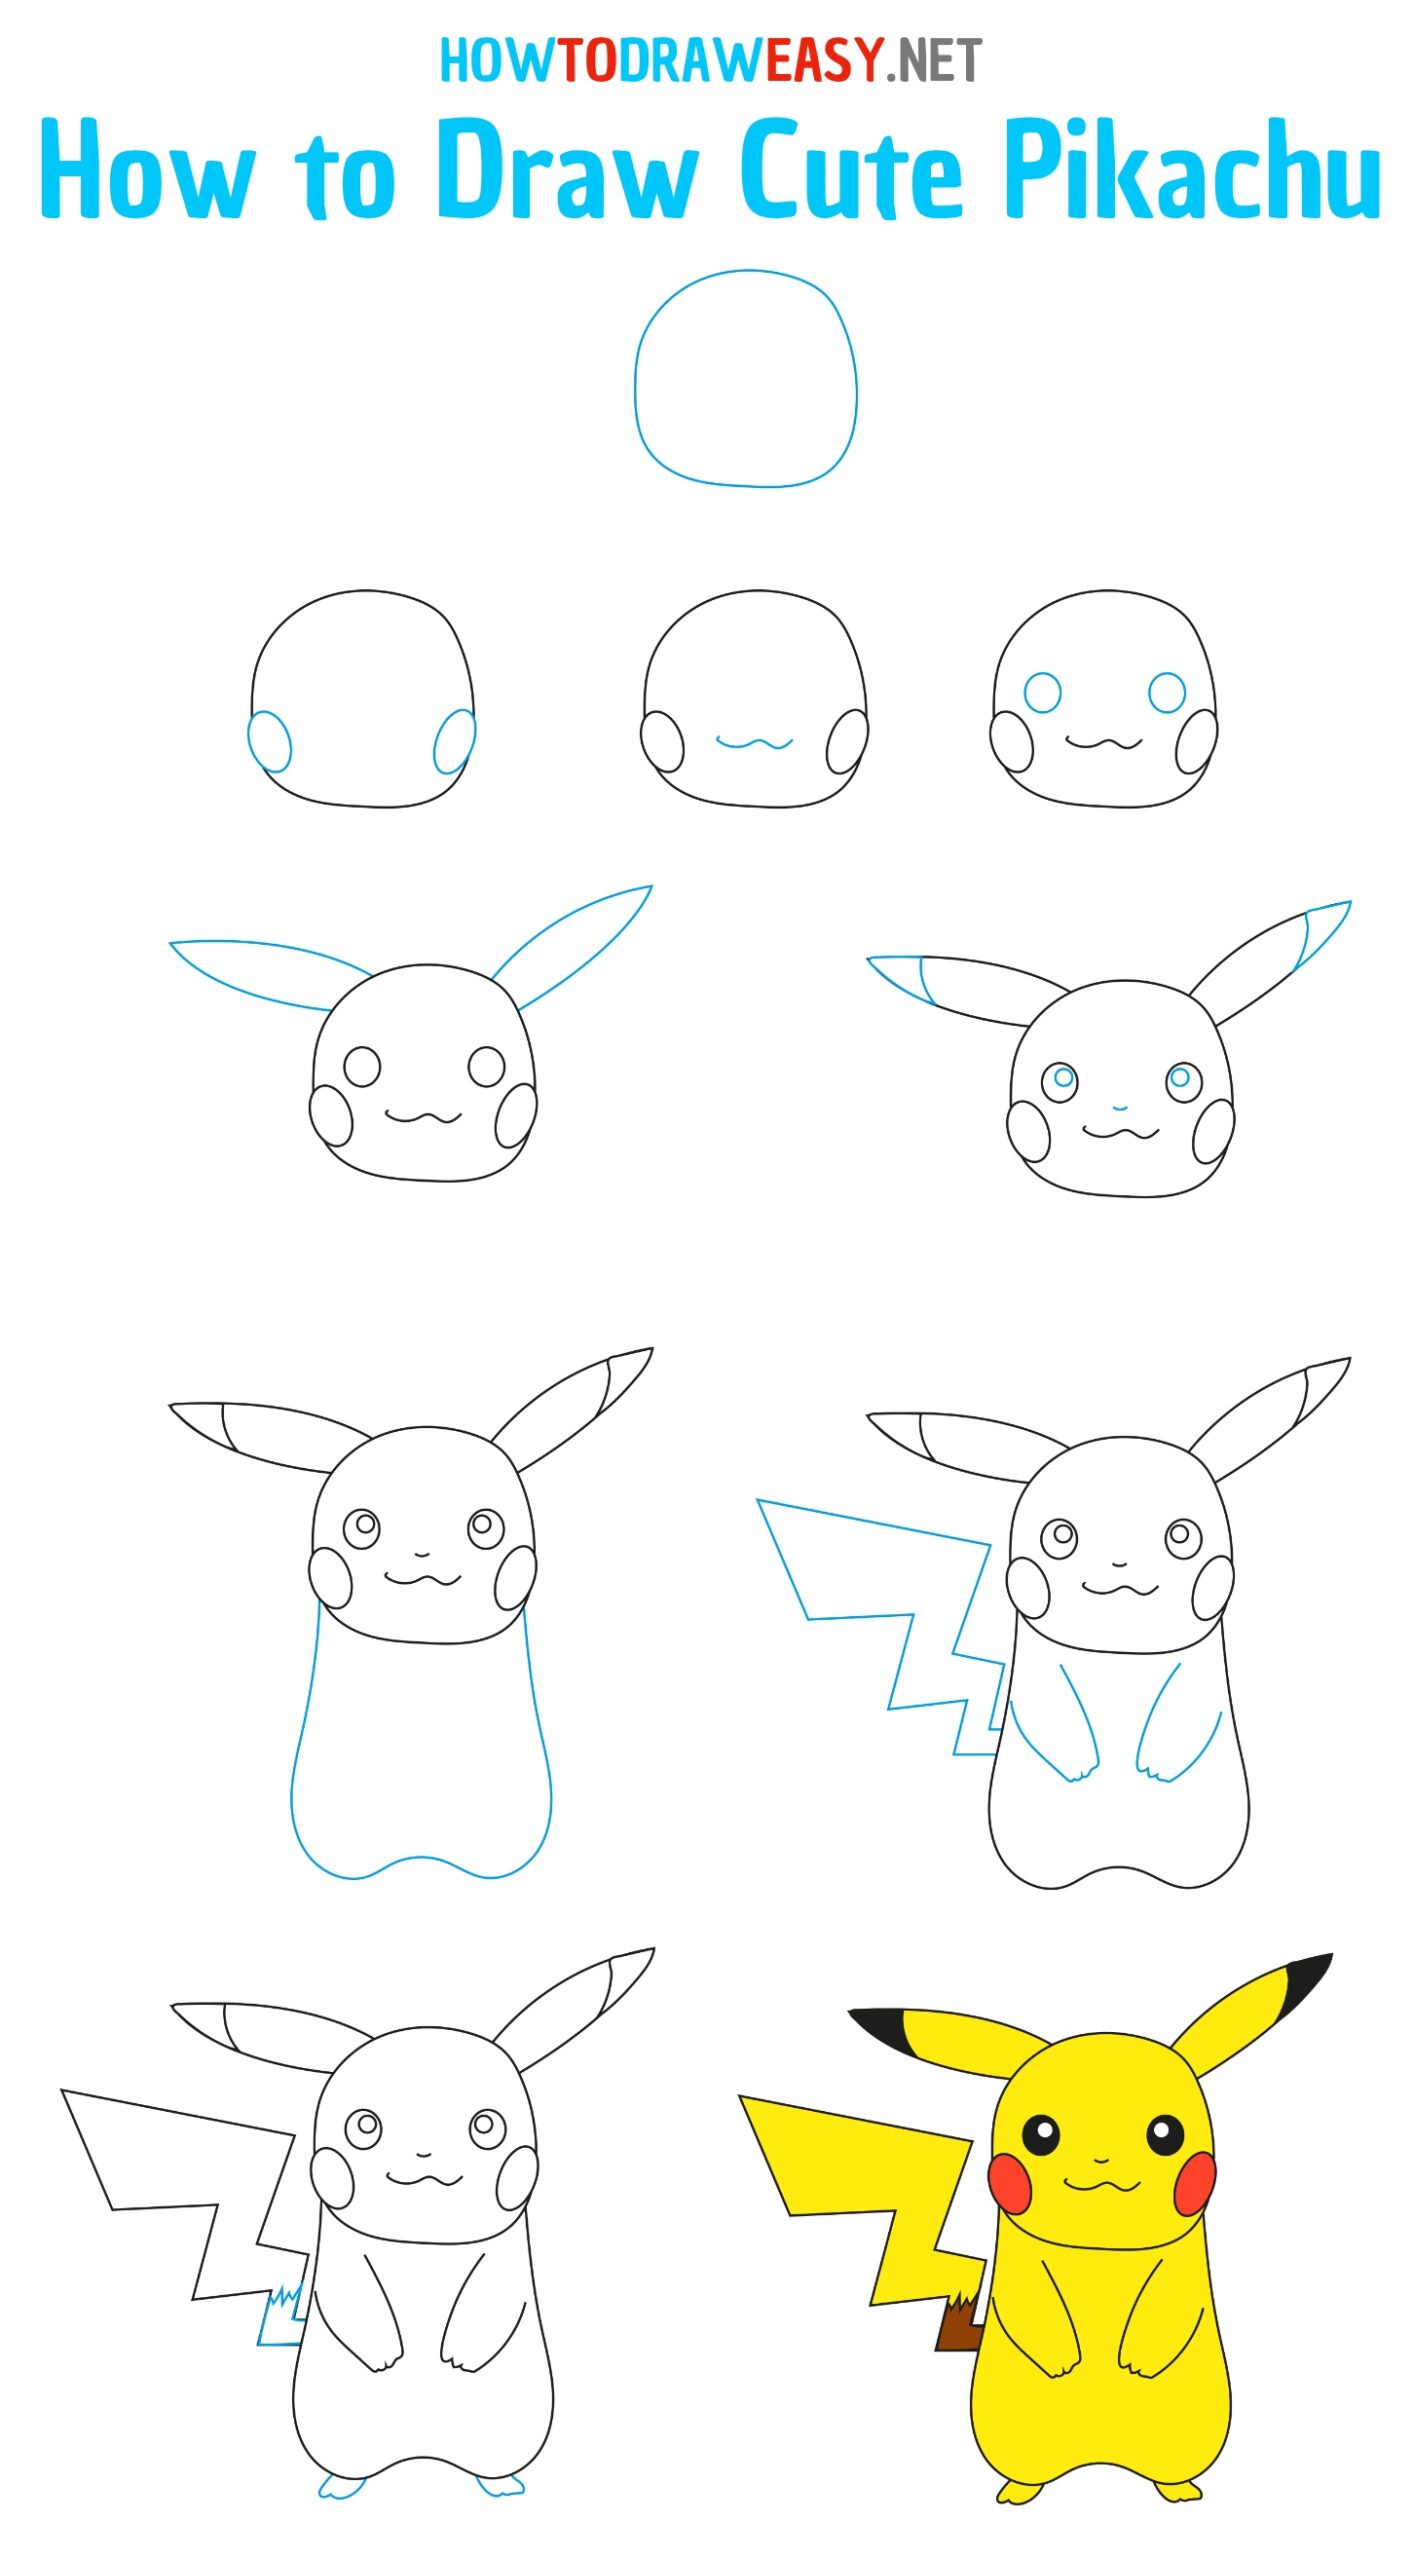 How to Draw Cute Pikachu Step by Step